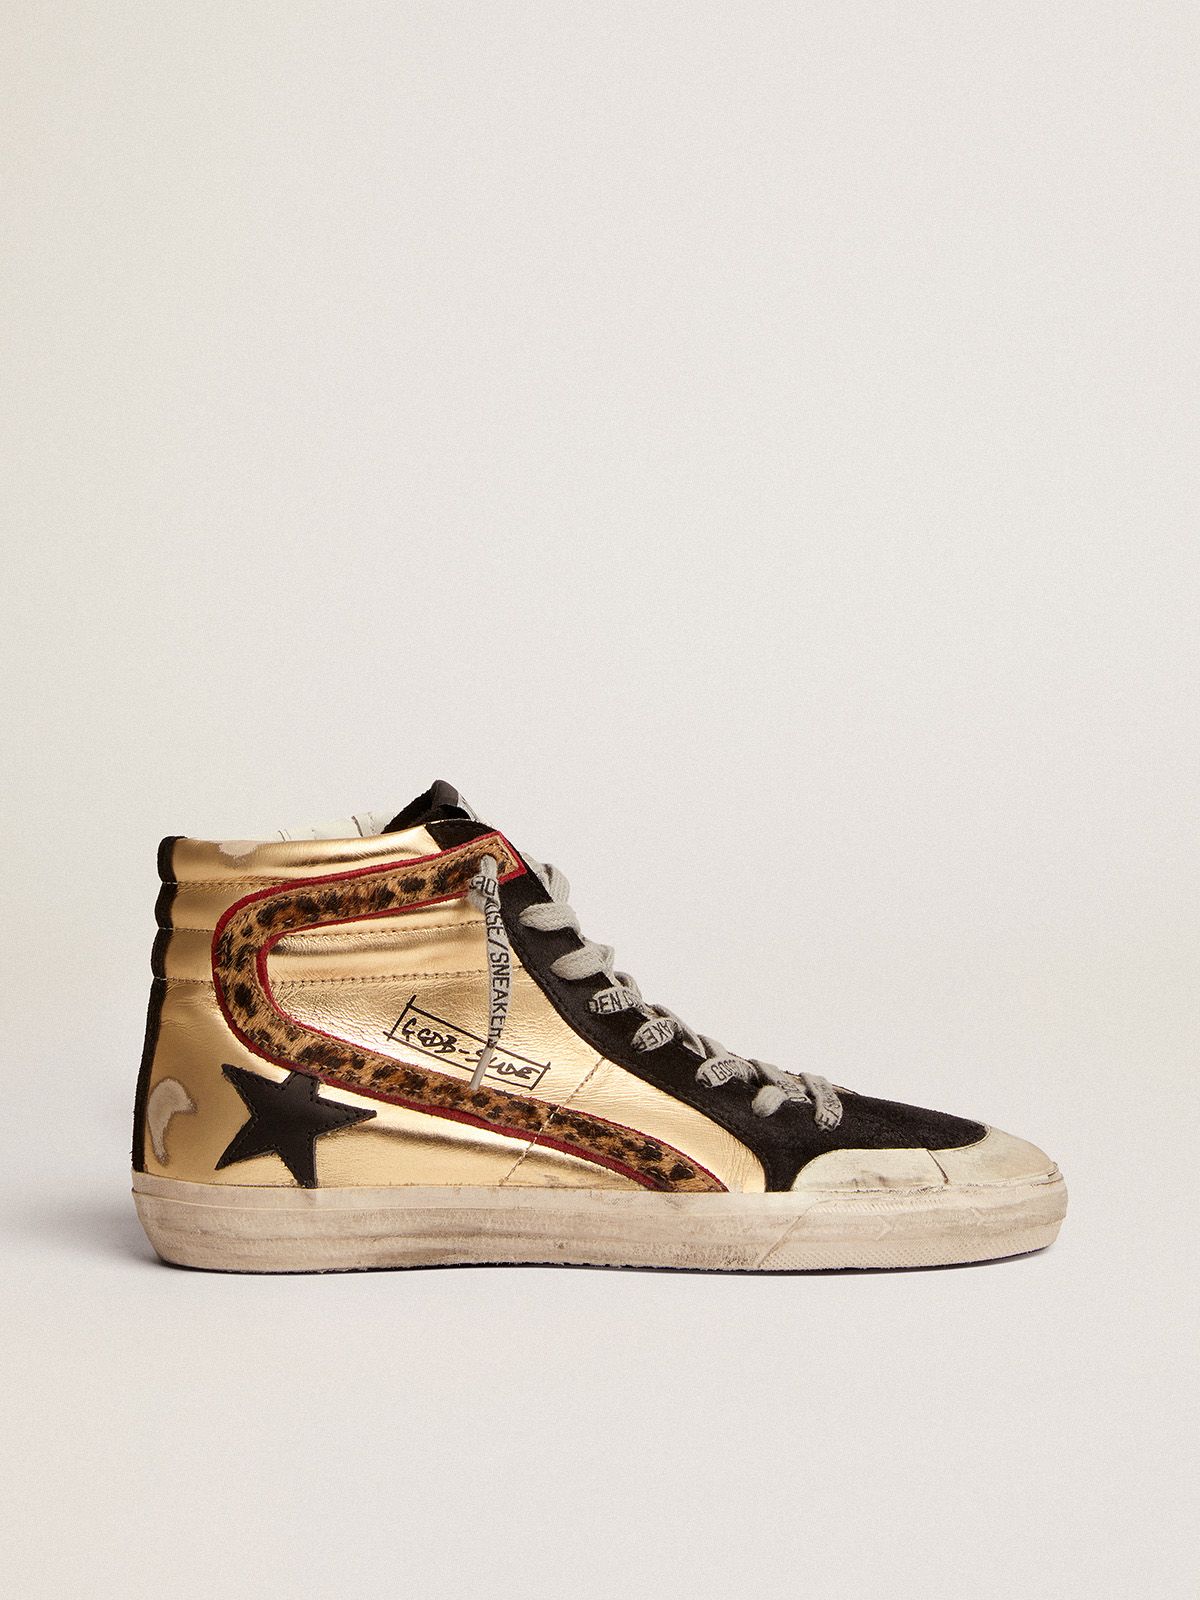 golden goose black gold in star Penstar leather sneakers pony insert Slide skin and with leopard-print